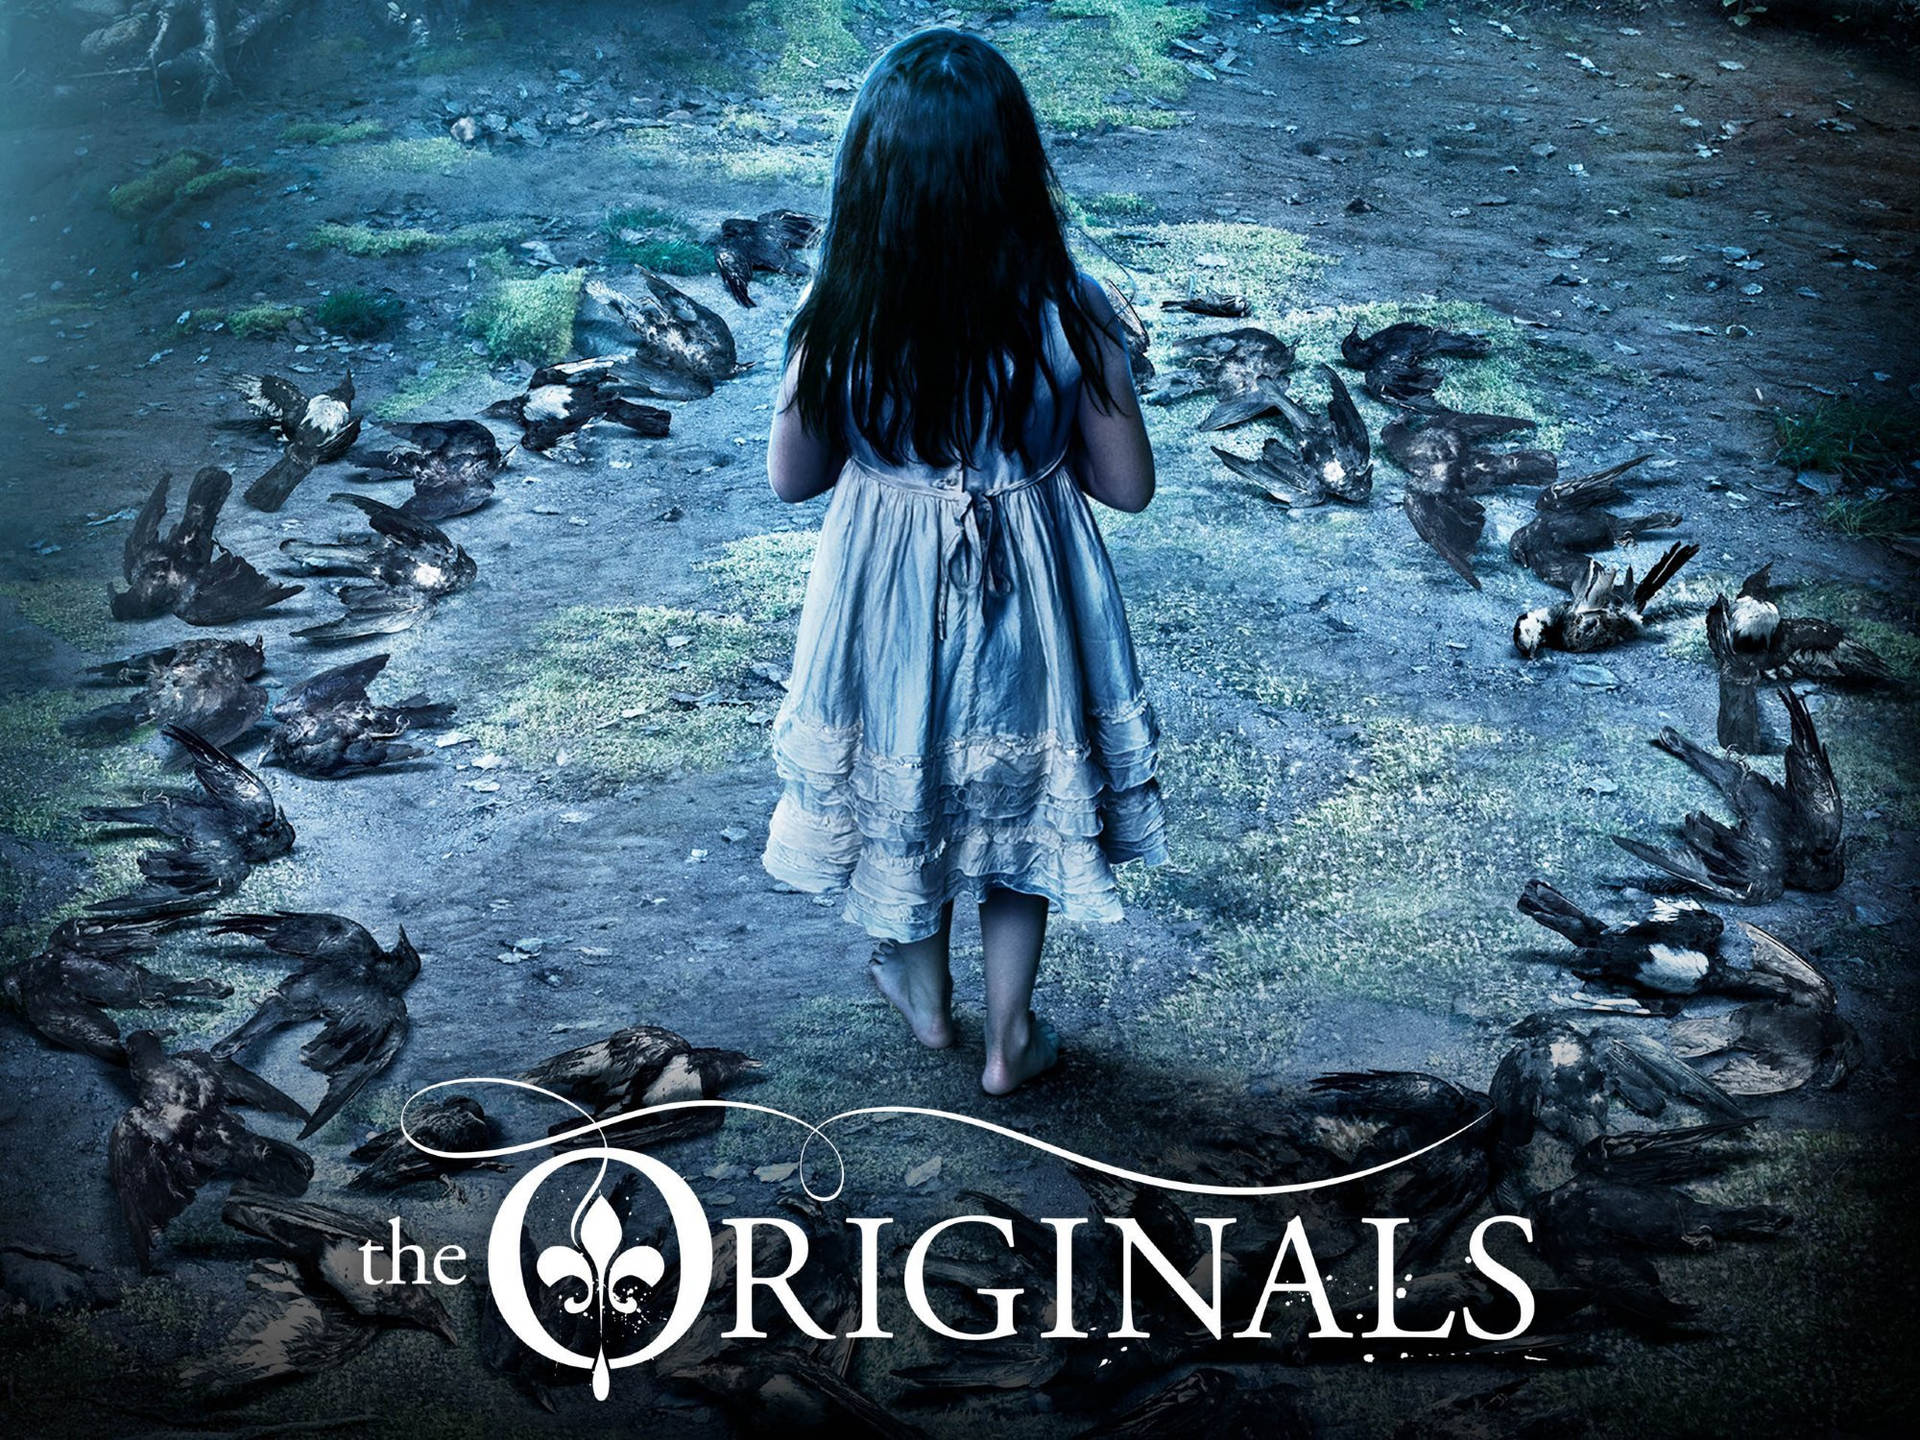 The Originals Young Girl Cover Background